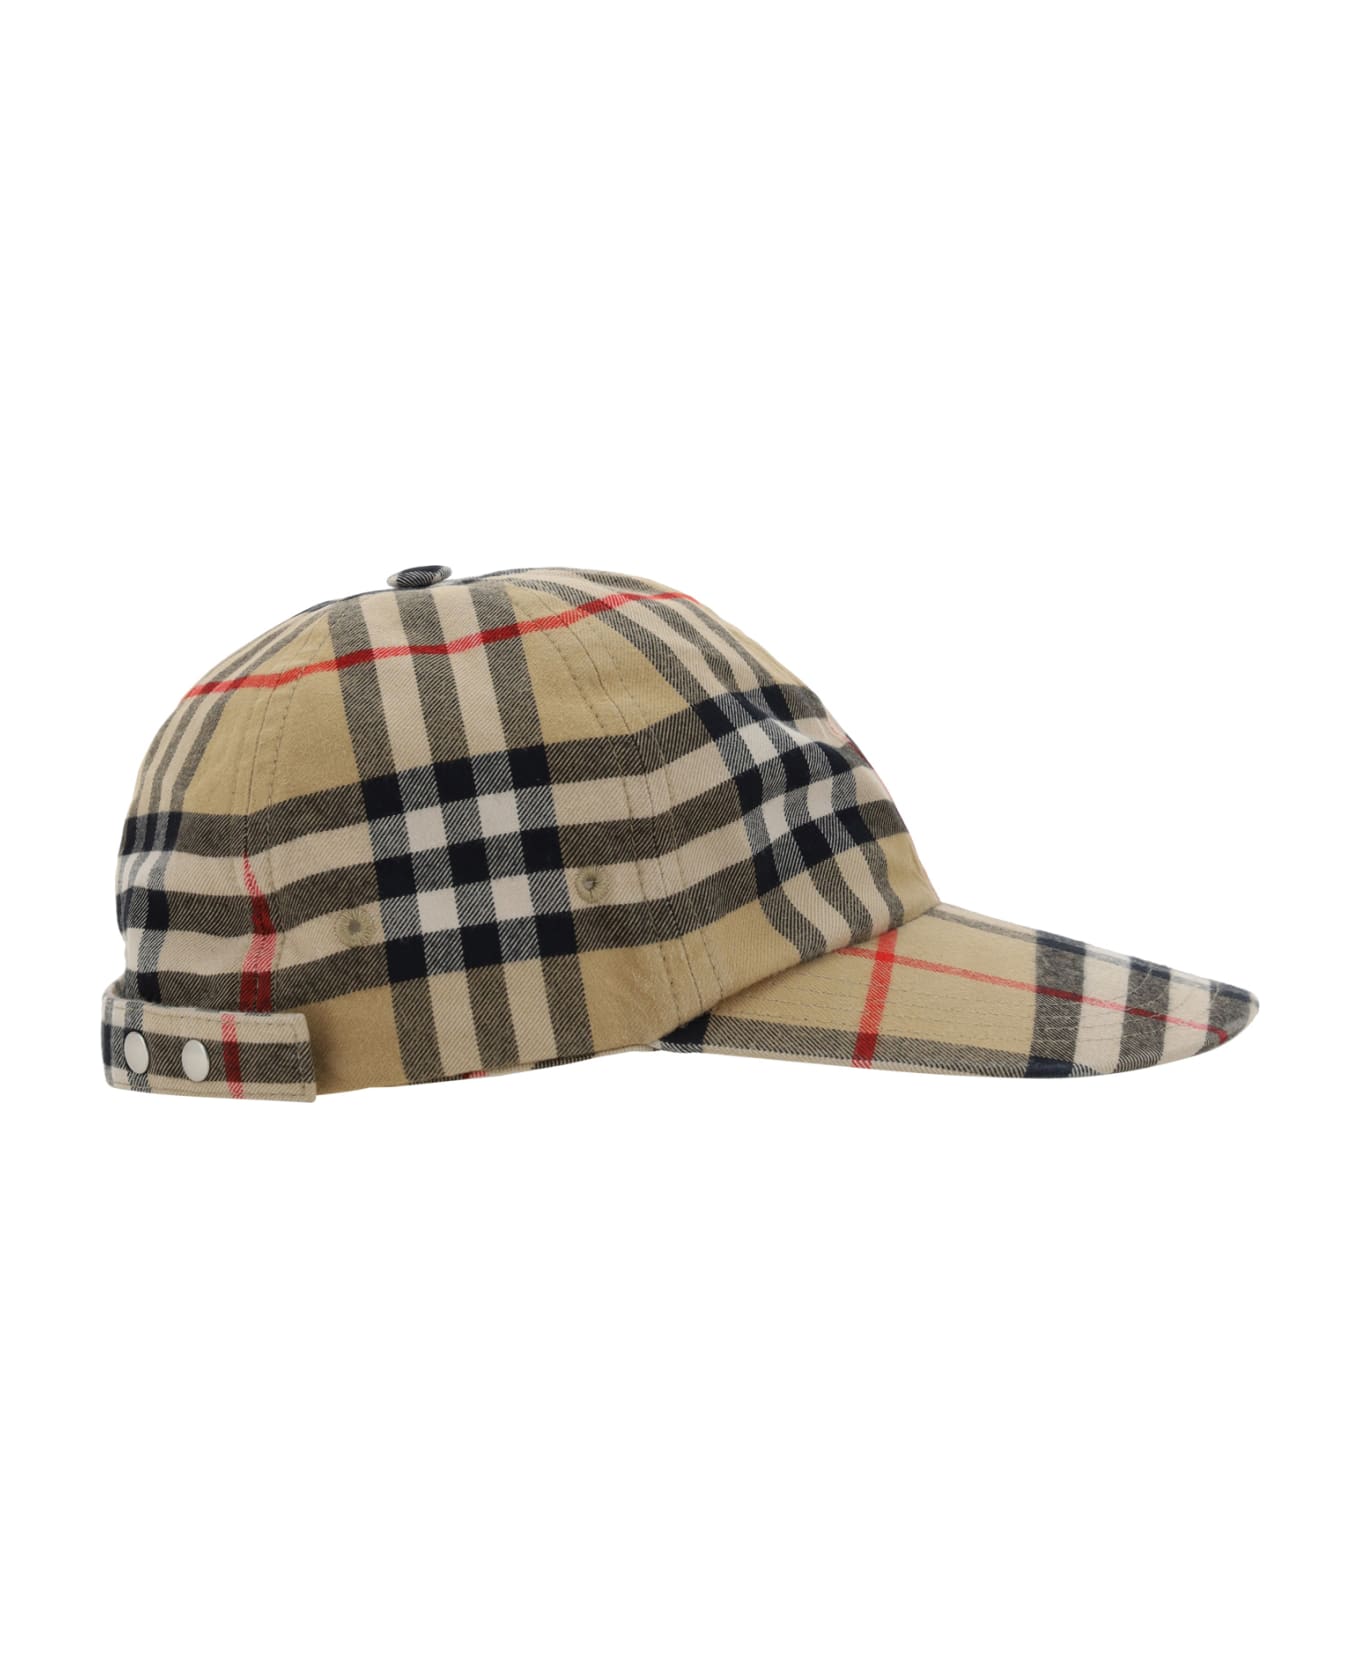 Burberry Baseball Cap With Check Print - Archive Beige 帽子